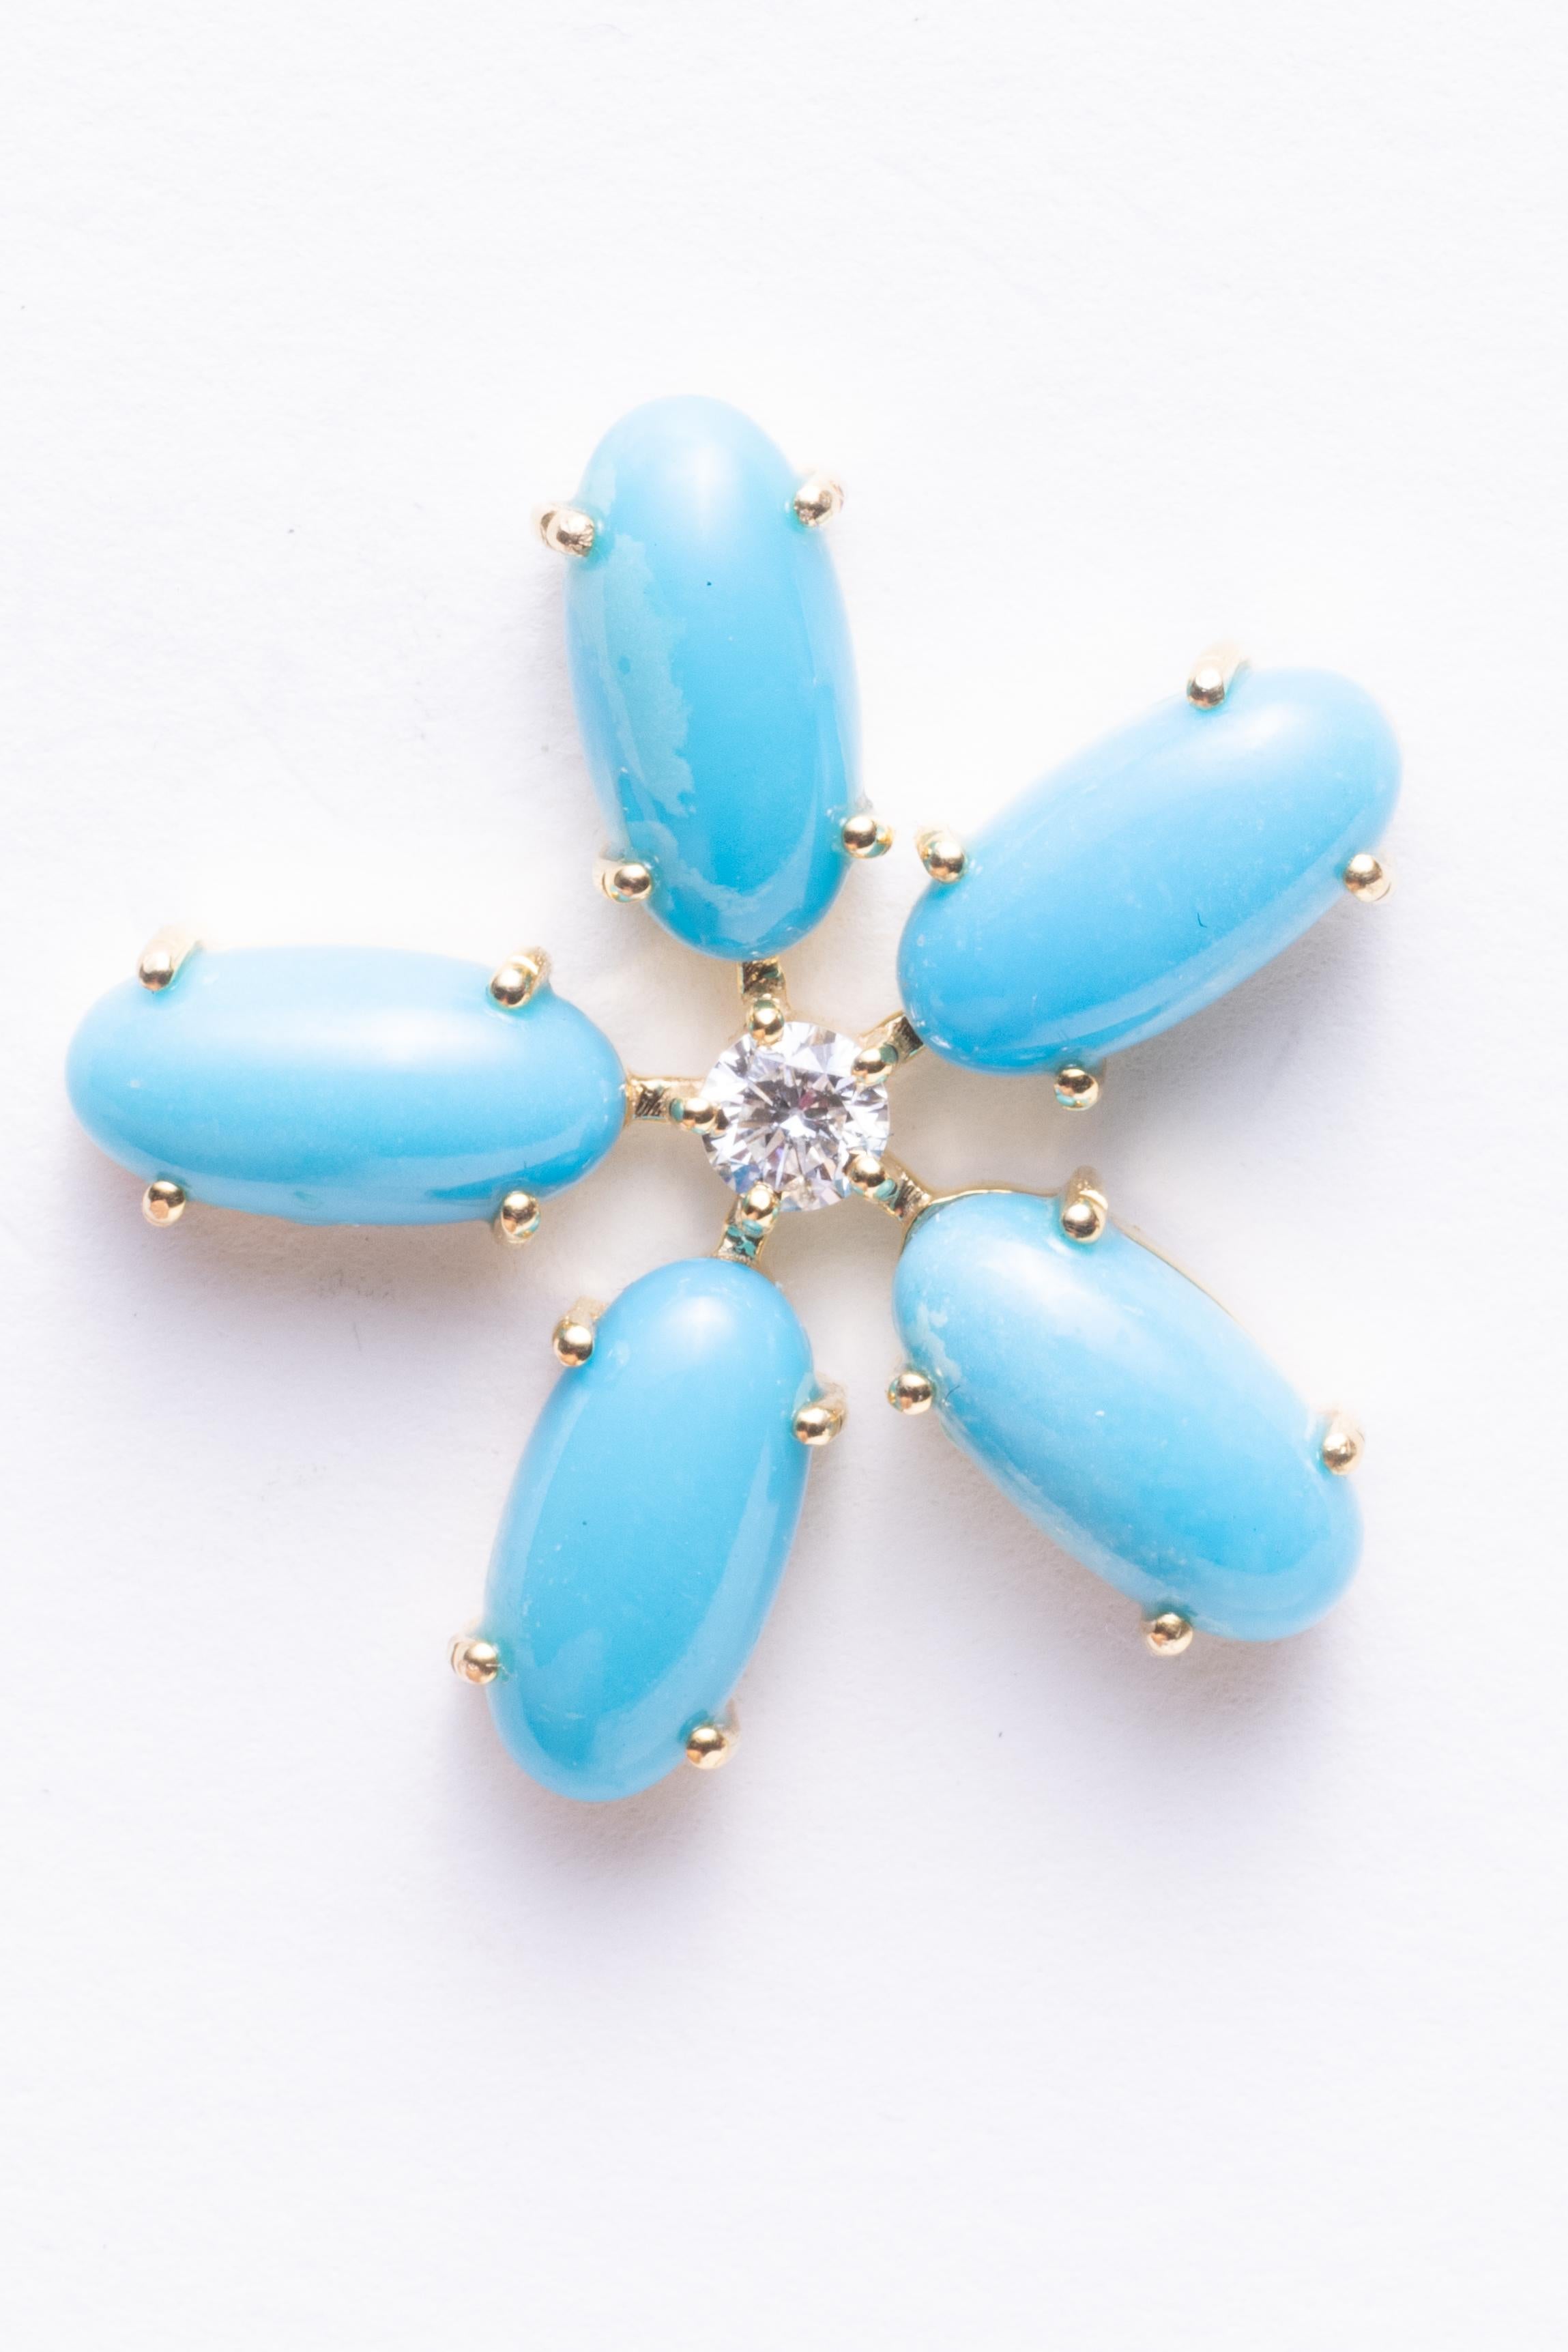 Sleeping Beauty Turquoise in an oval, cabochon shape in a flower motif with a center brilliant cut diamond set in 18K gold.  Post for pierced ears.

The fine jewelry collection is sourced, designed or created by Deborah. Through her international